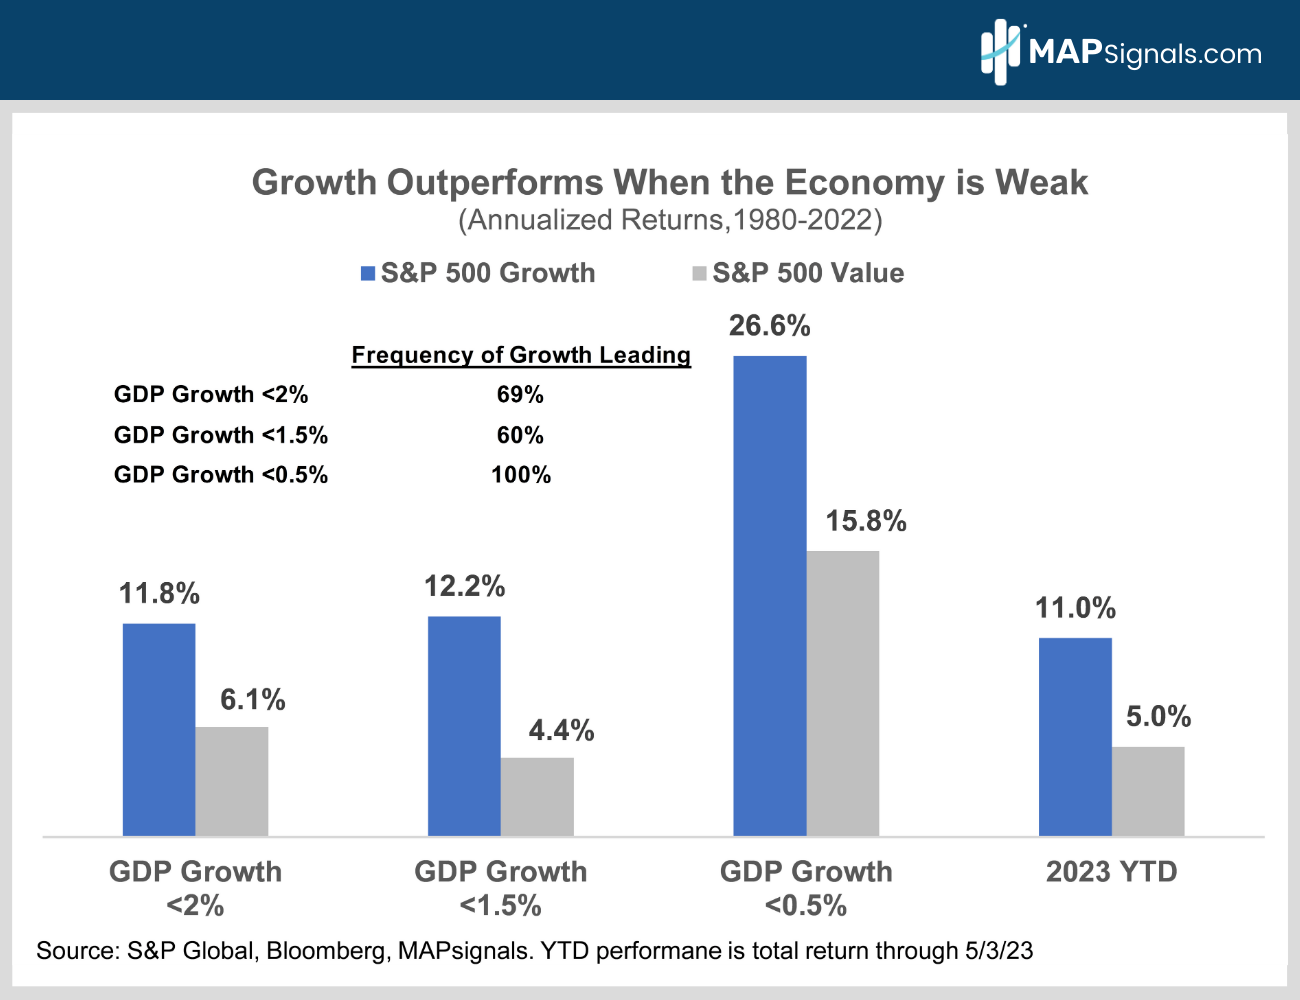 Growth Outperforms When the Economy is Weak | MAPsignals